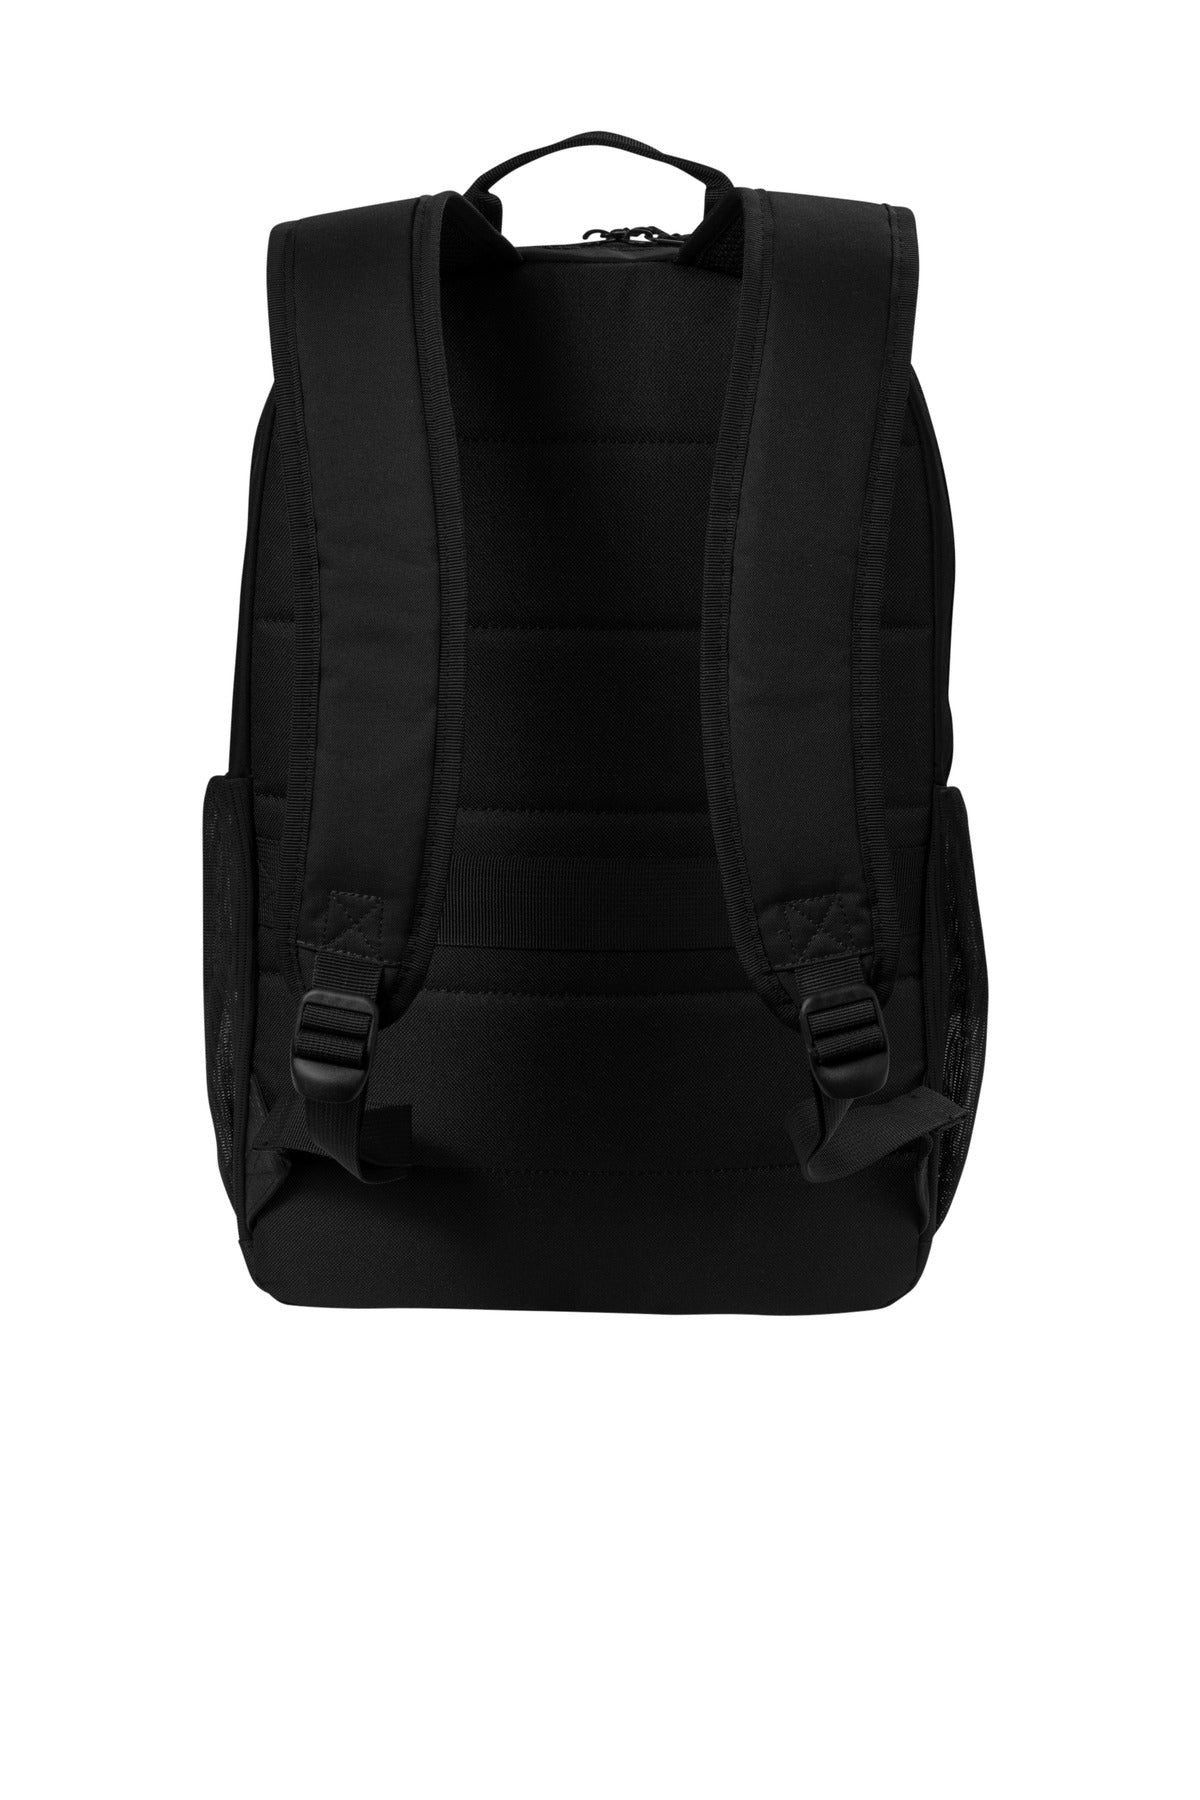 Port Authority® Daily Commute Backpack BG226 - DFW Impression